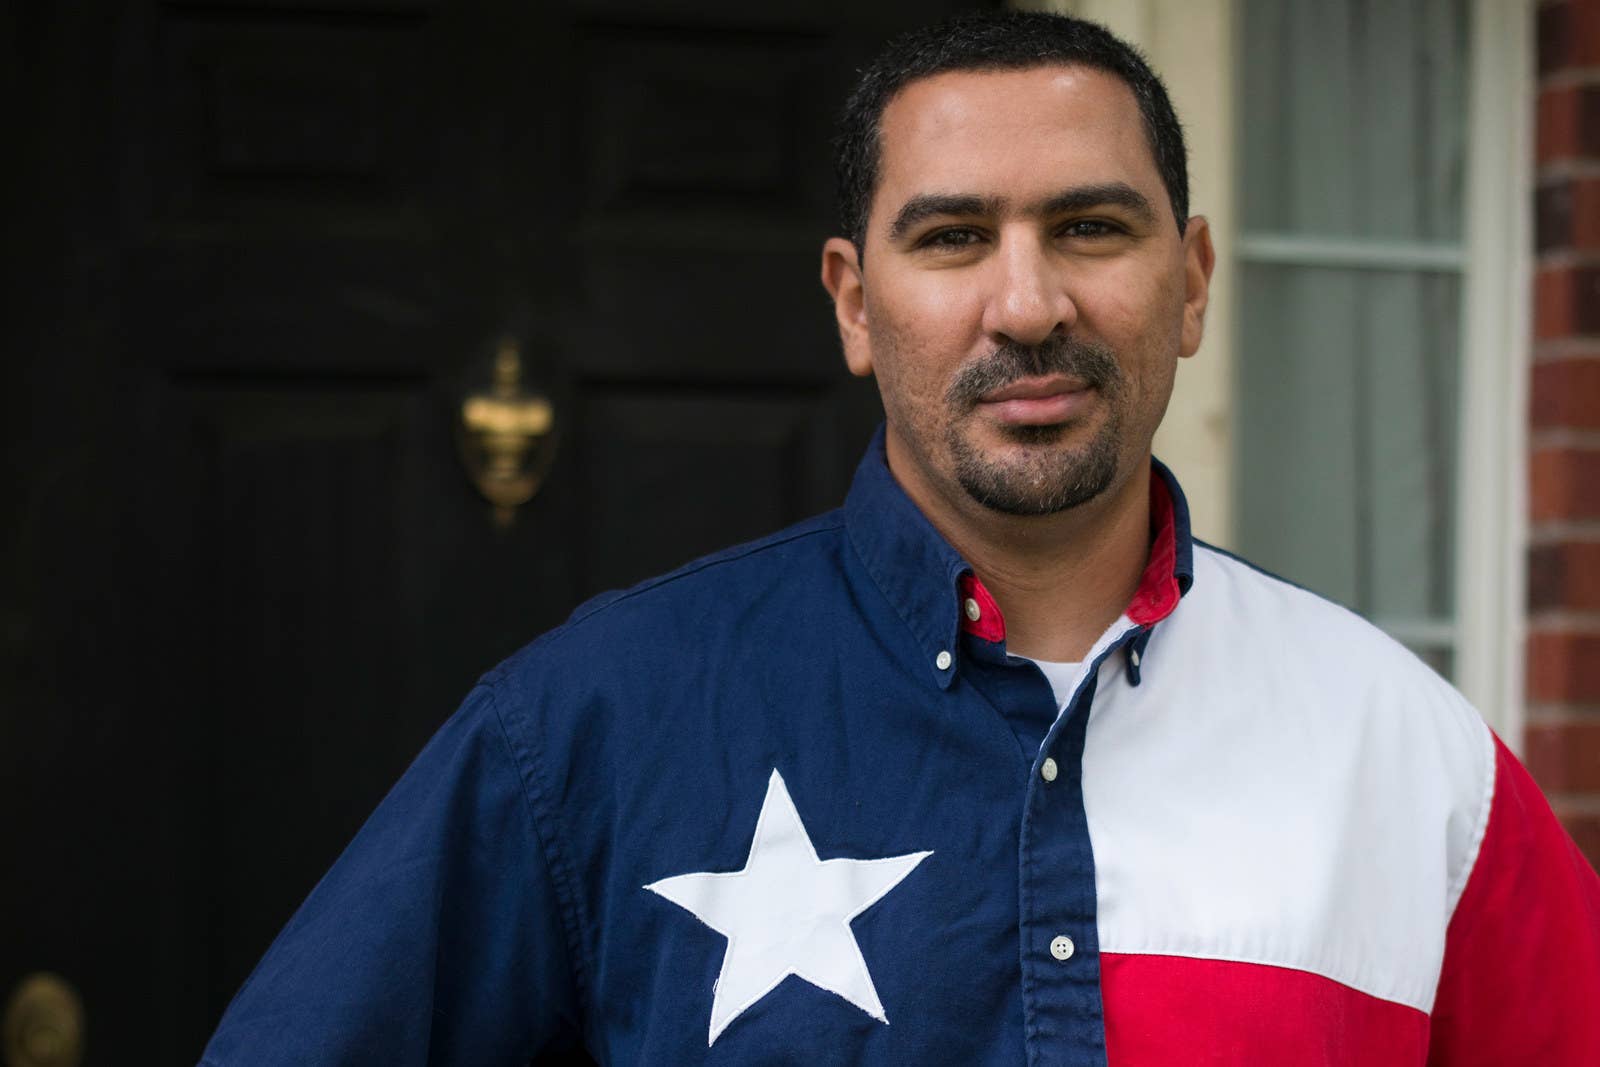 Mohamed Elibiary outside his home in Plano, Texas, in 2015.